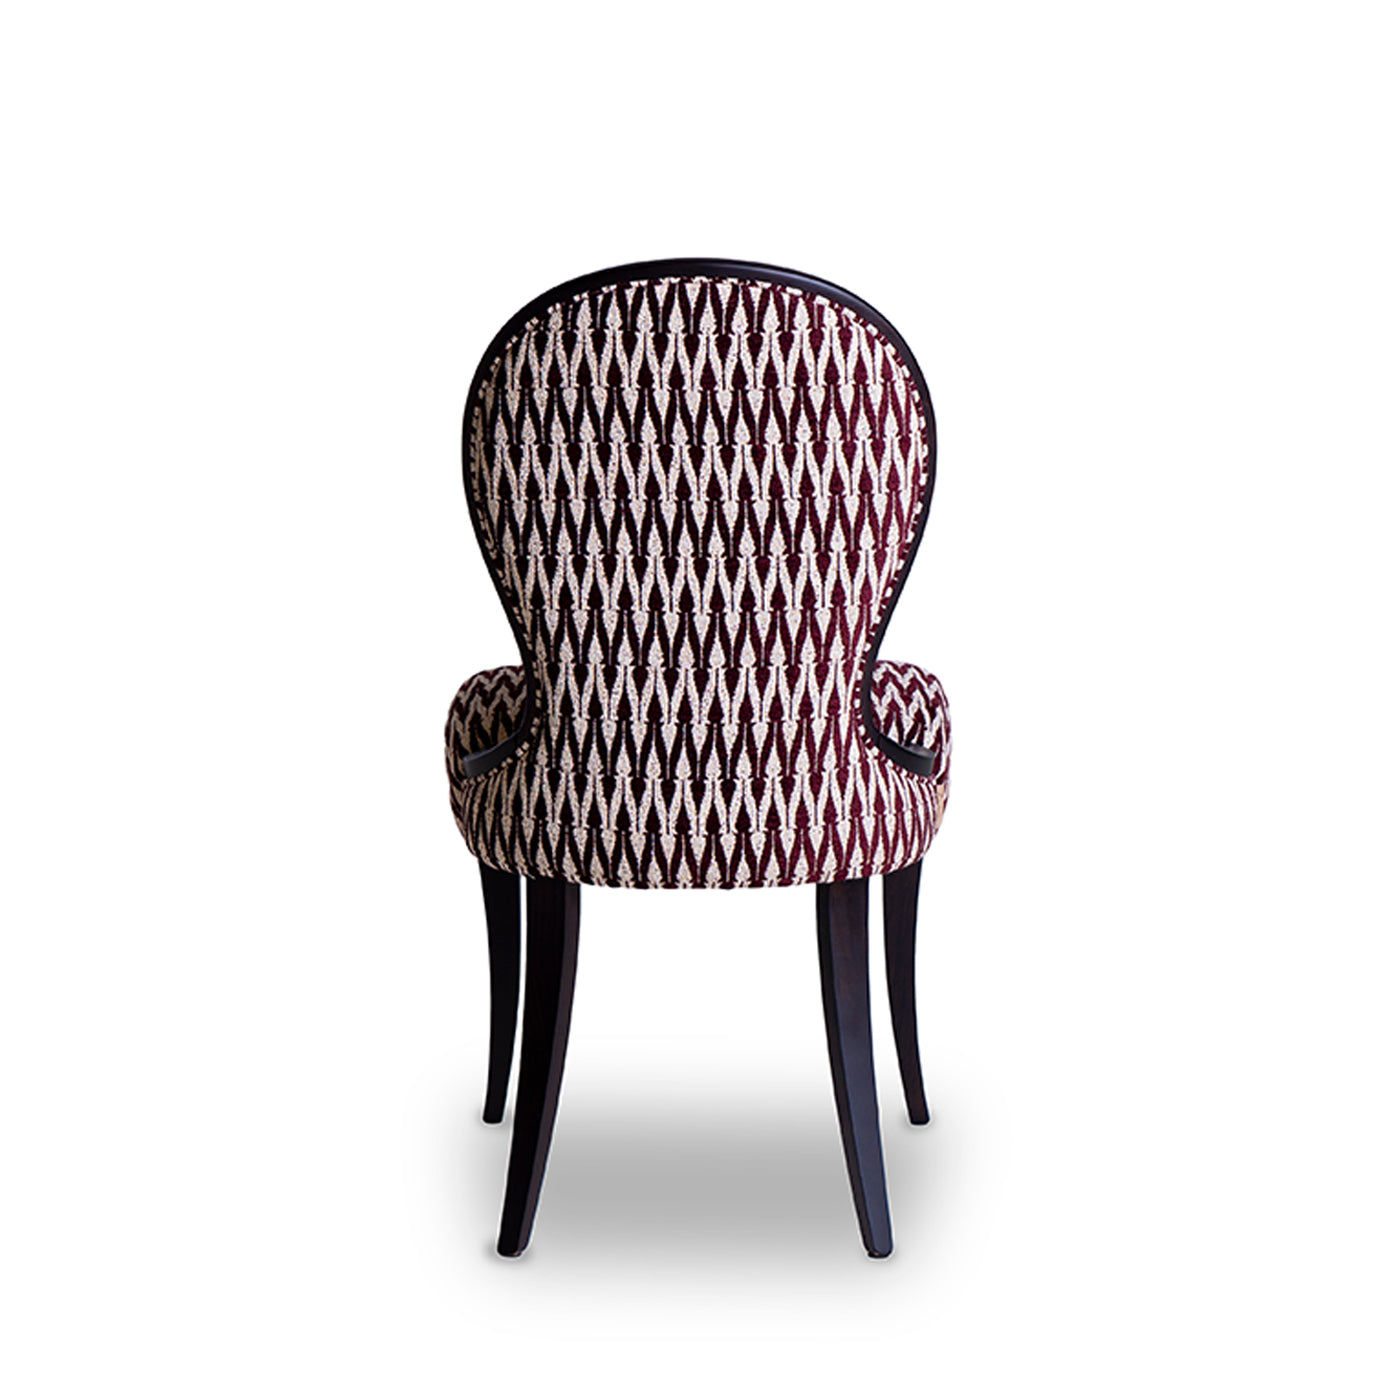 Gong Patterned Chair  - Alternative view 5